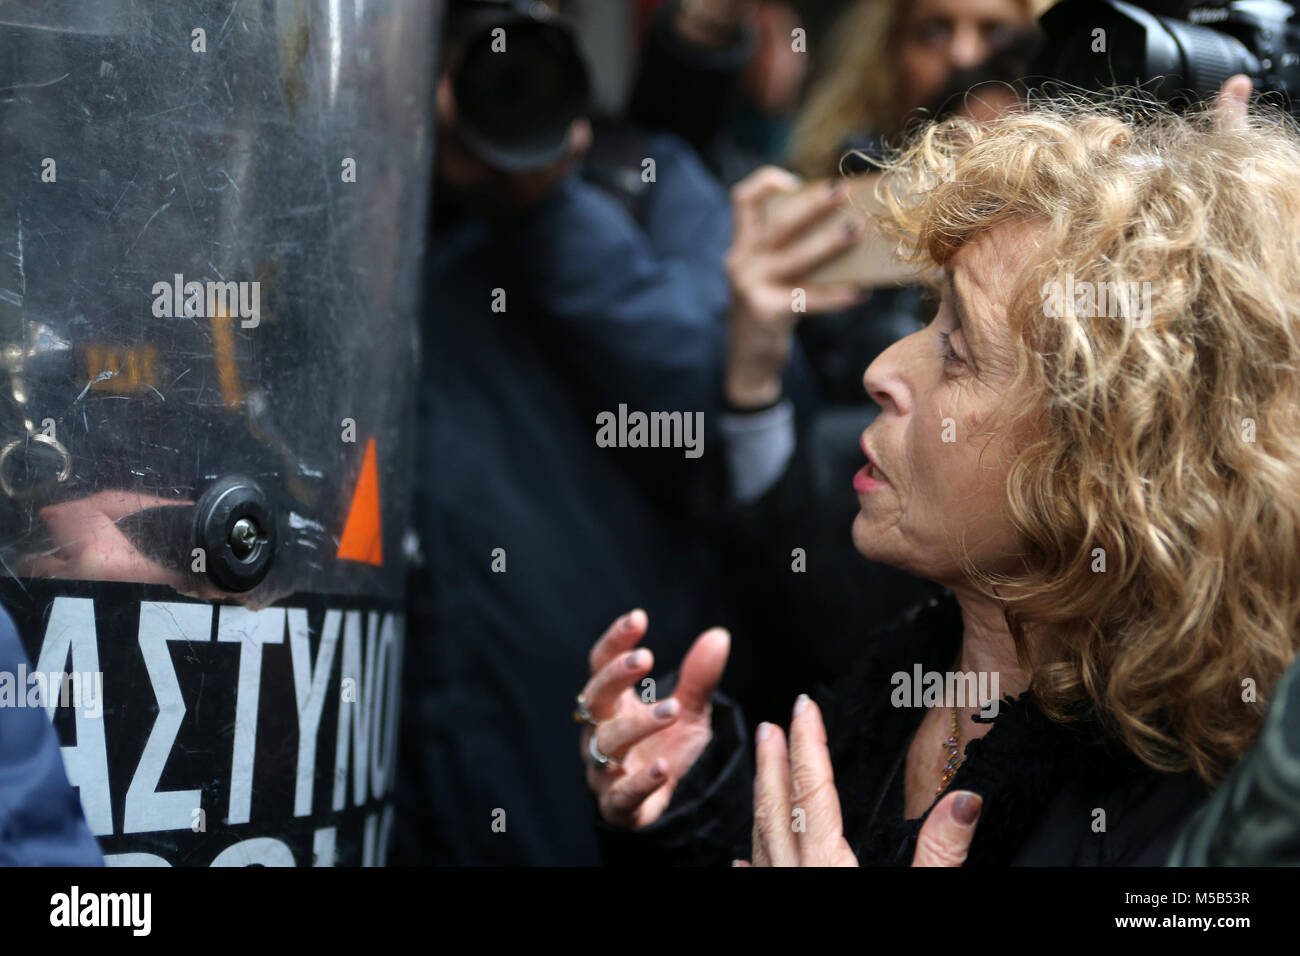 Athens, Greece. 21st Feb, 2018. A woman demonstrates against auctions of foreclosed properties outside a notary's office in Athens, Greece, on Feb. 21, 2018. Greek authorities will speed up the auctions of foreclosed properties which are conducted only electronically as of Wednesday, according to the new law voted in parliament last month. Over 1,700 auctions had been scheduled until Wednesday to take place in coming weeks via a special electronic platform set up in cooperation with the associations of notaries across Greece. Credit: Marios Lolos/Xinhua/Alamy Live News Stock Photo